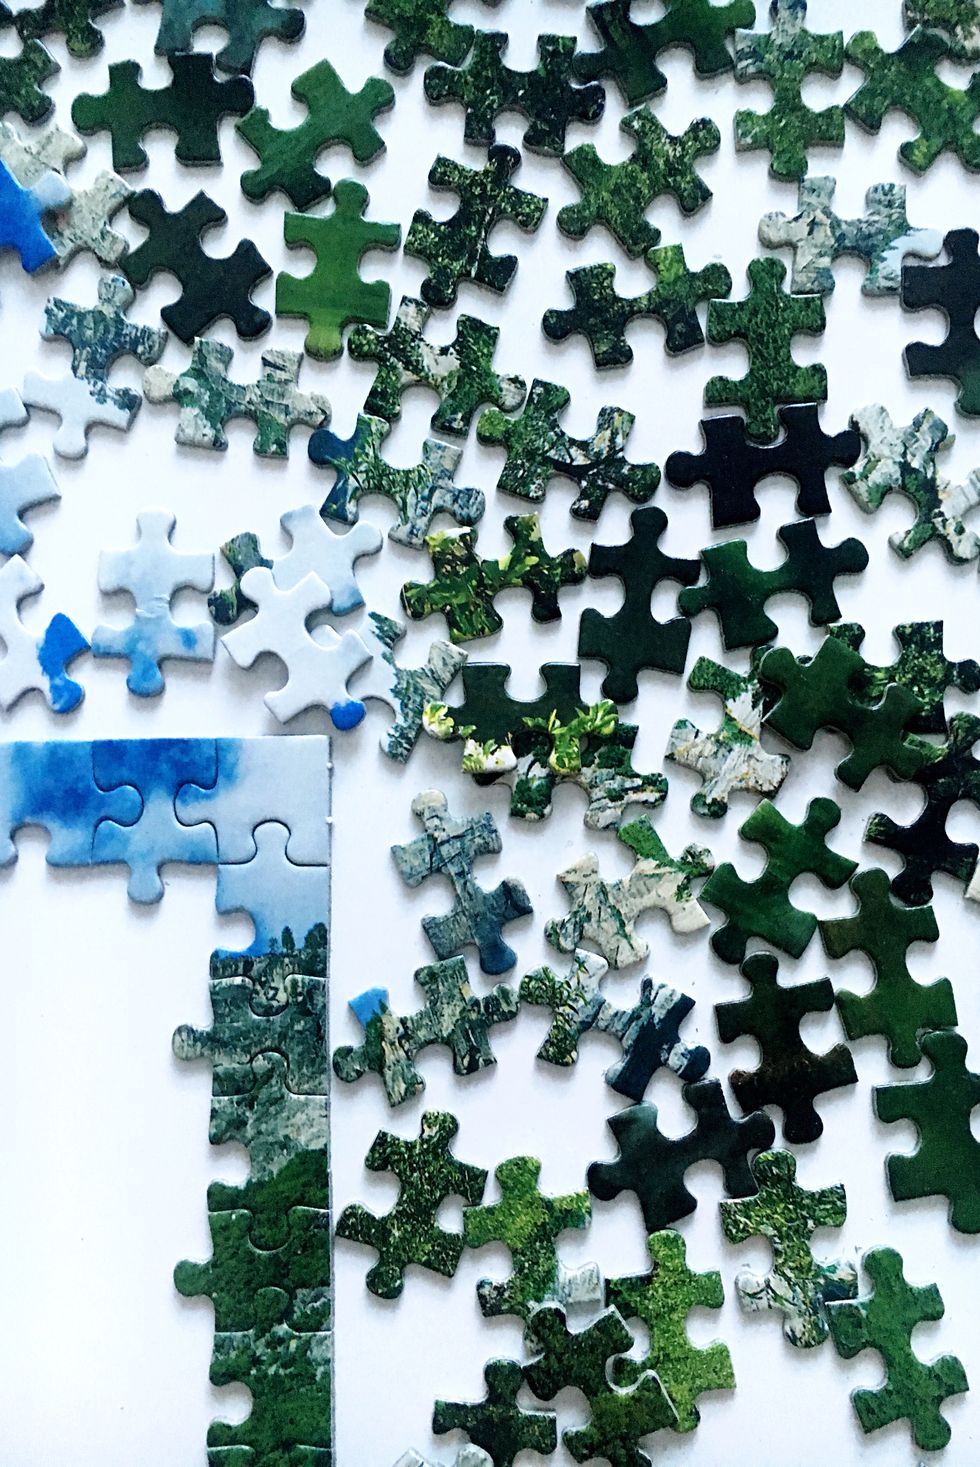 High Angle View Of Jigsaw Puzzle On Table